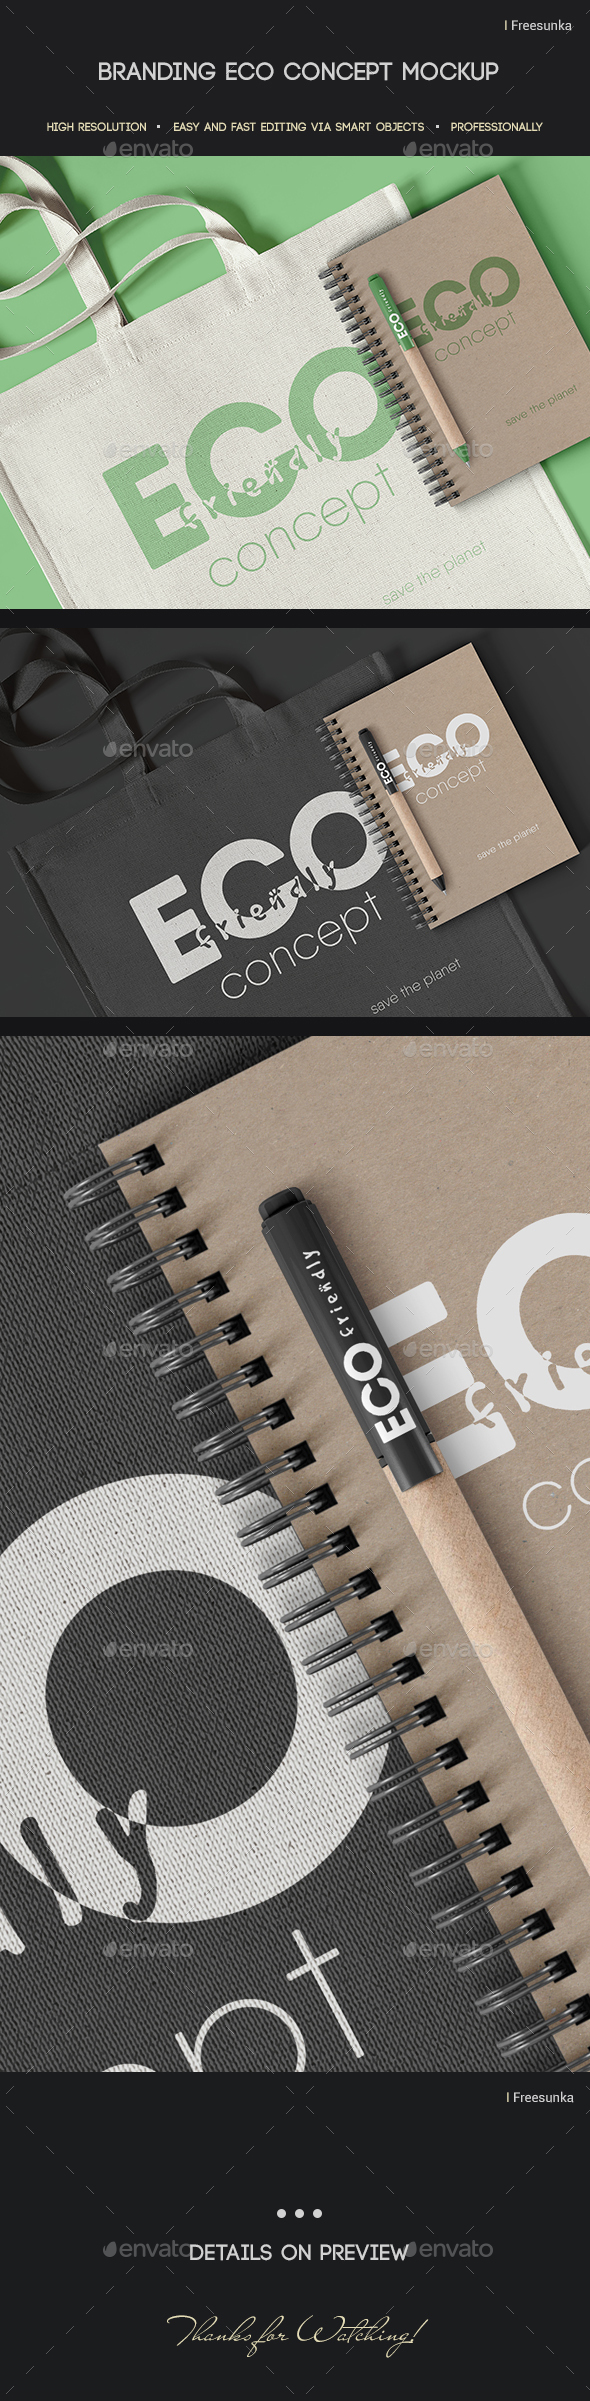 Download Graphicriver 31502169 Branding Eco Concept Mockup Zip Updated Nulled Free Download